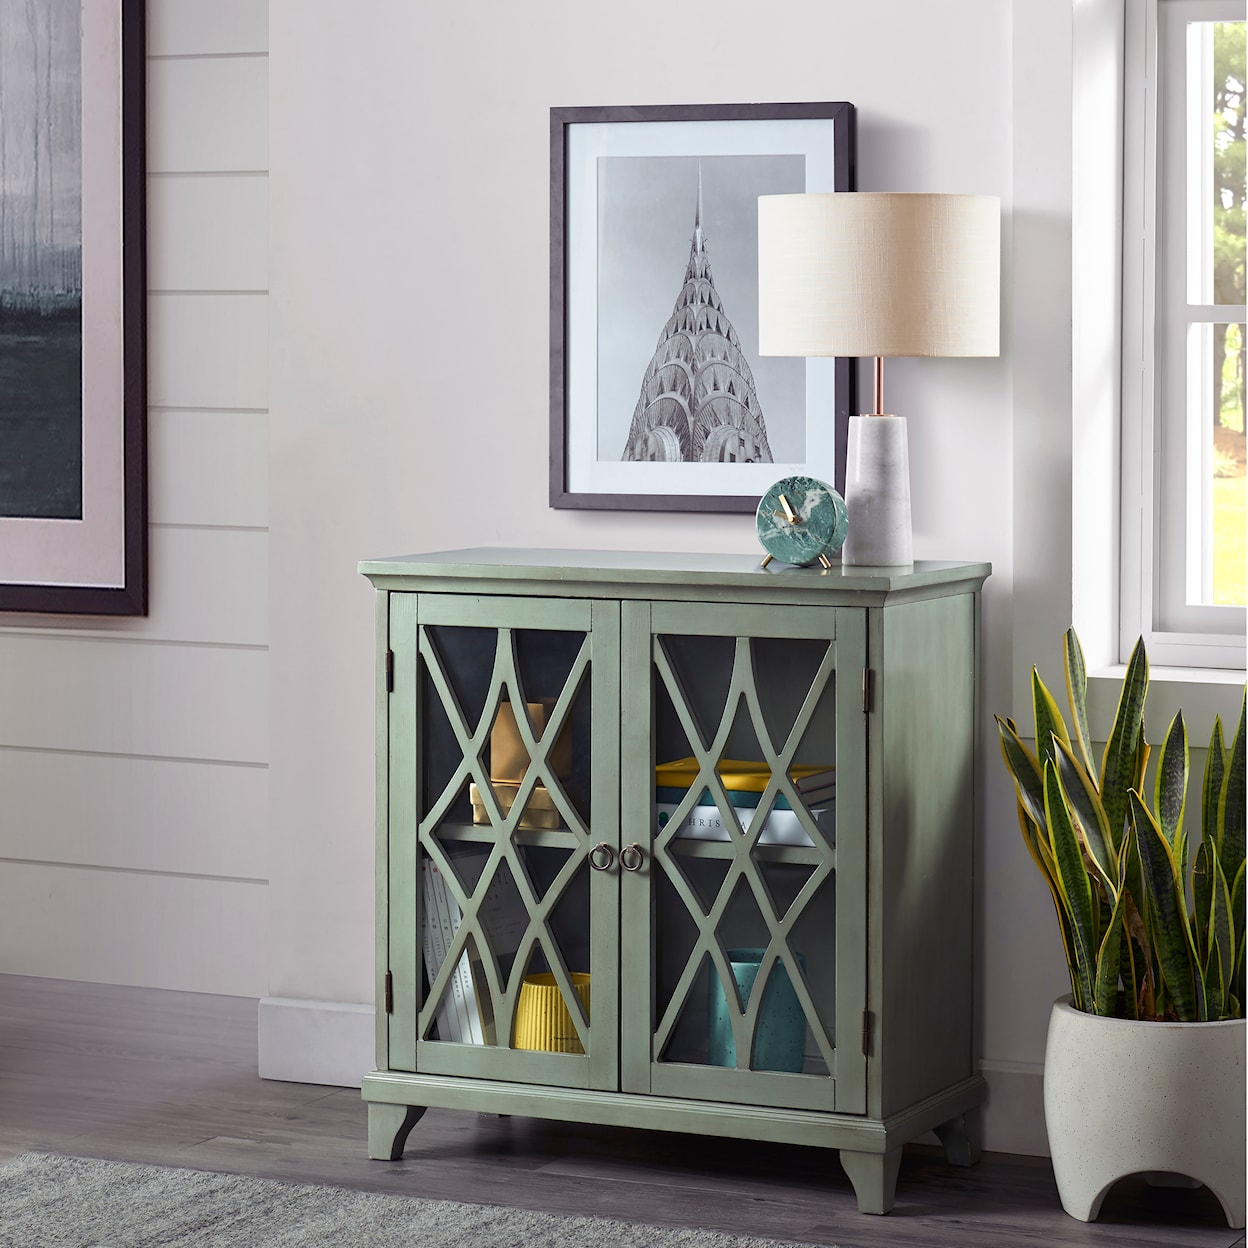 Accentrics Home Accents Two Door Chest in Sage